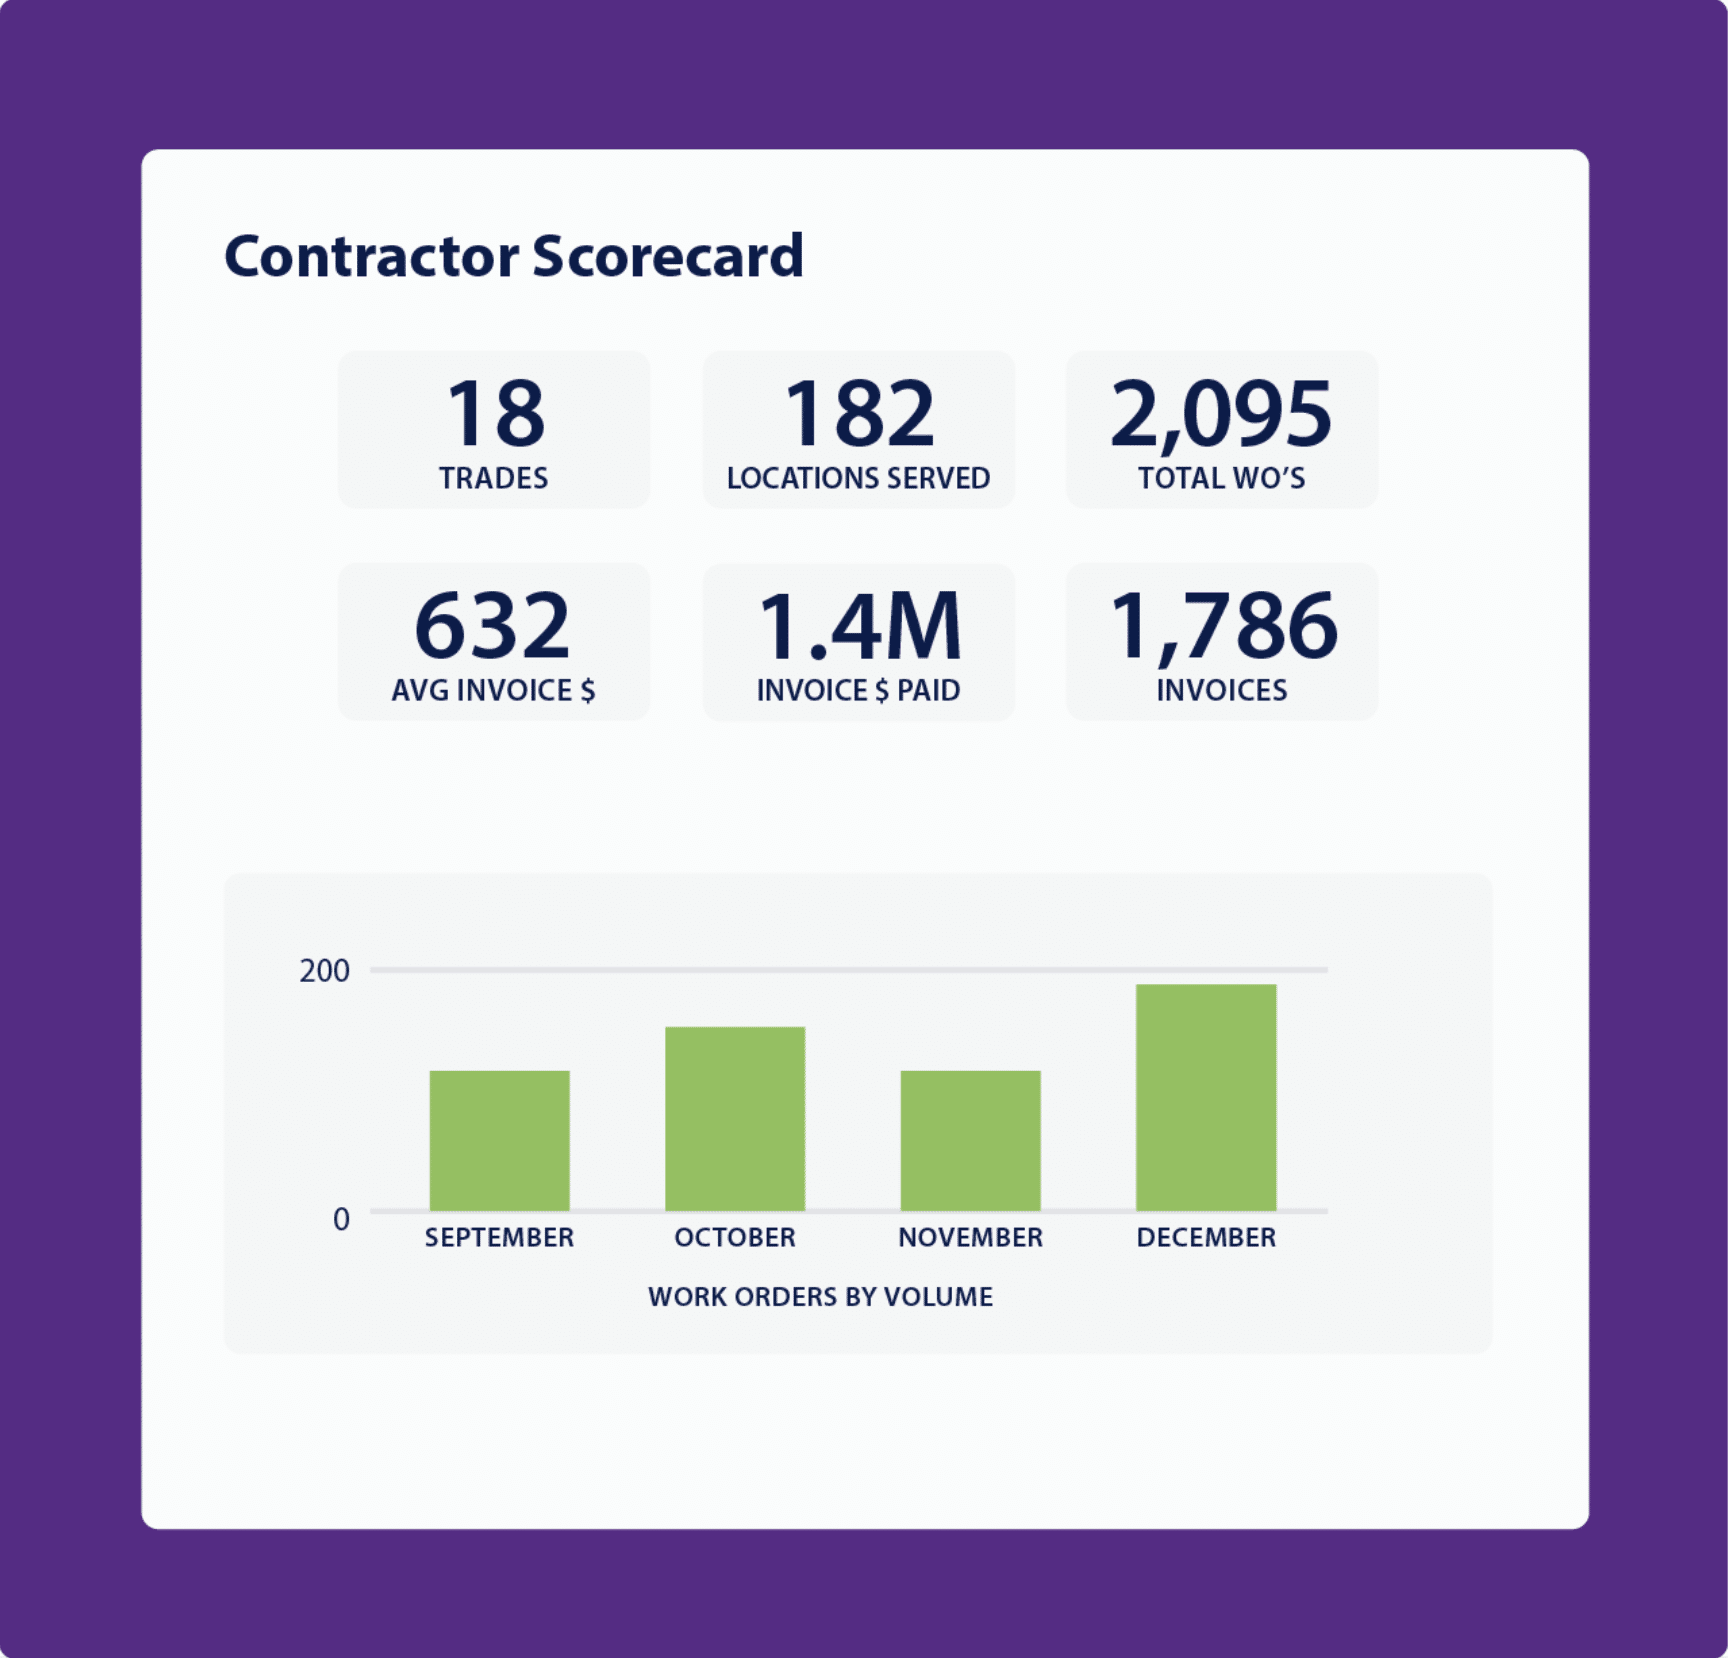 Contractor Scorecard visualized within software platform